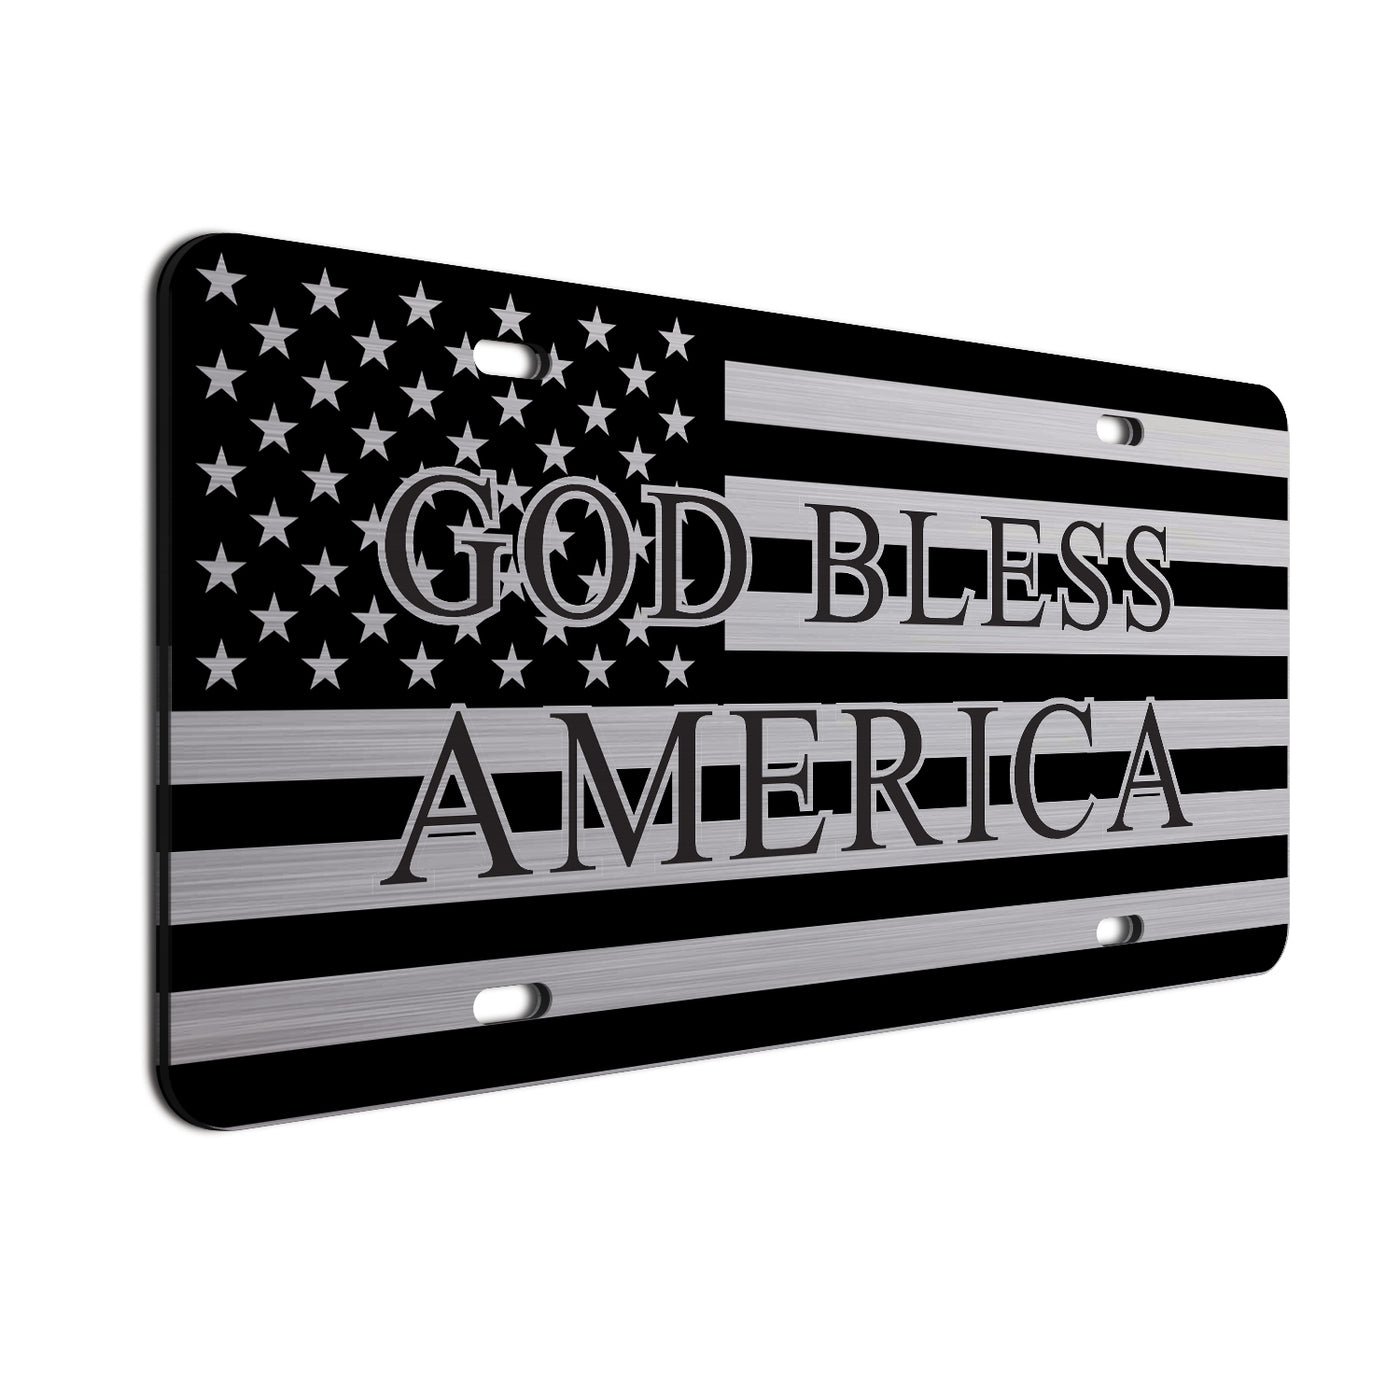 God Bless America License Plate | Weather Resistant | Made in the USA| Precision-Crafted | Universal 6" x 12" Size with Installation Slots